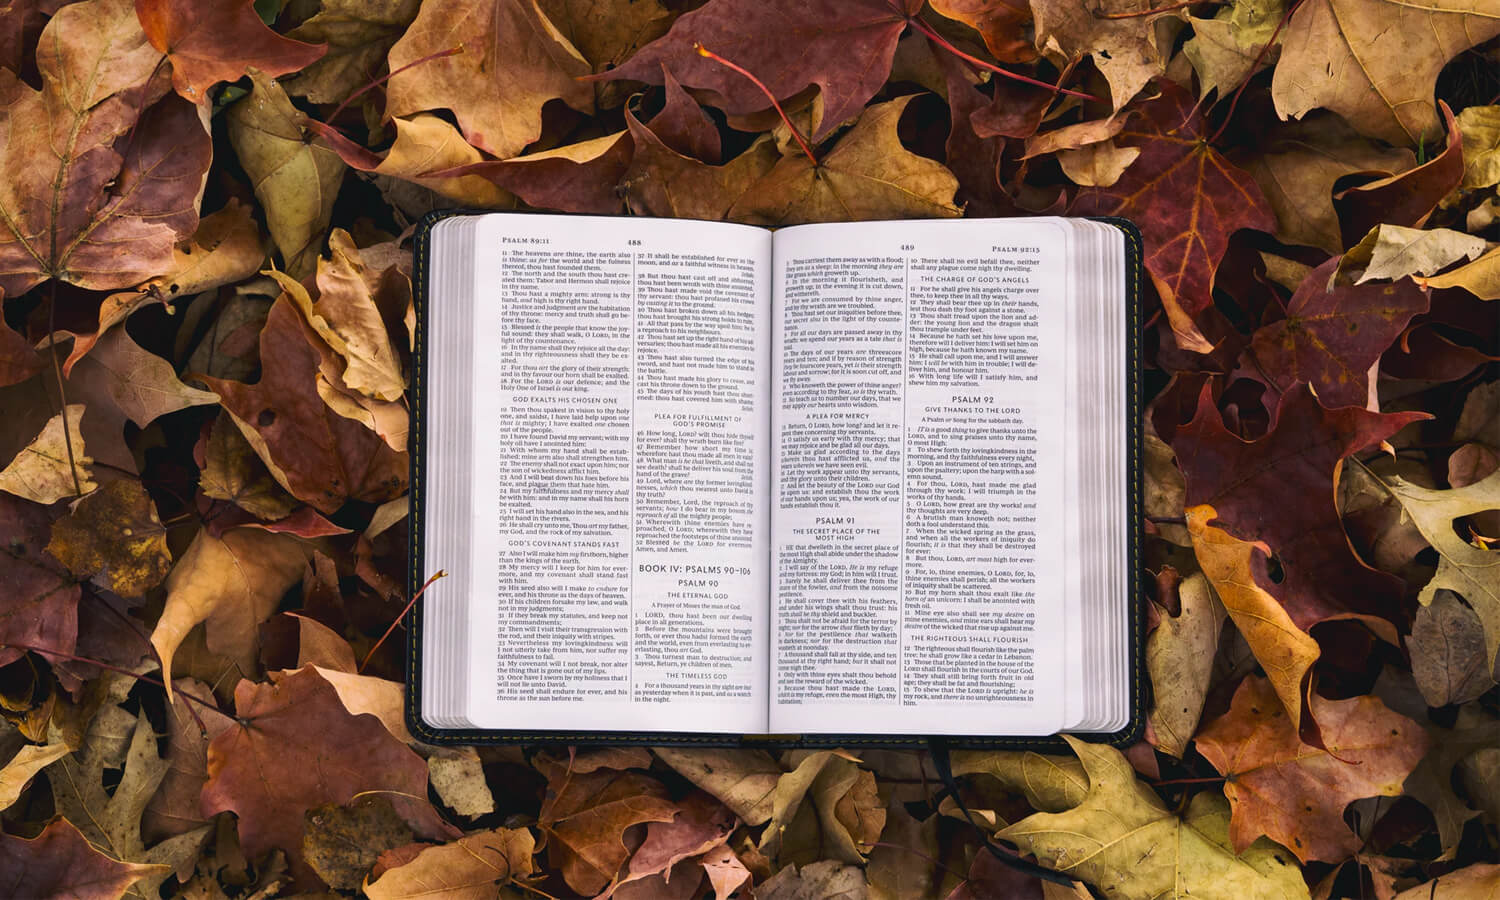 Is the Bible the word of God?